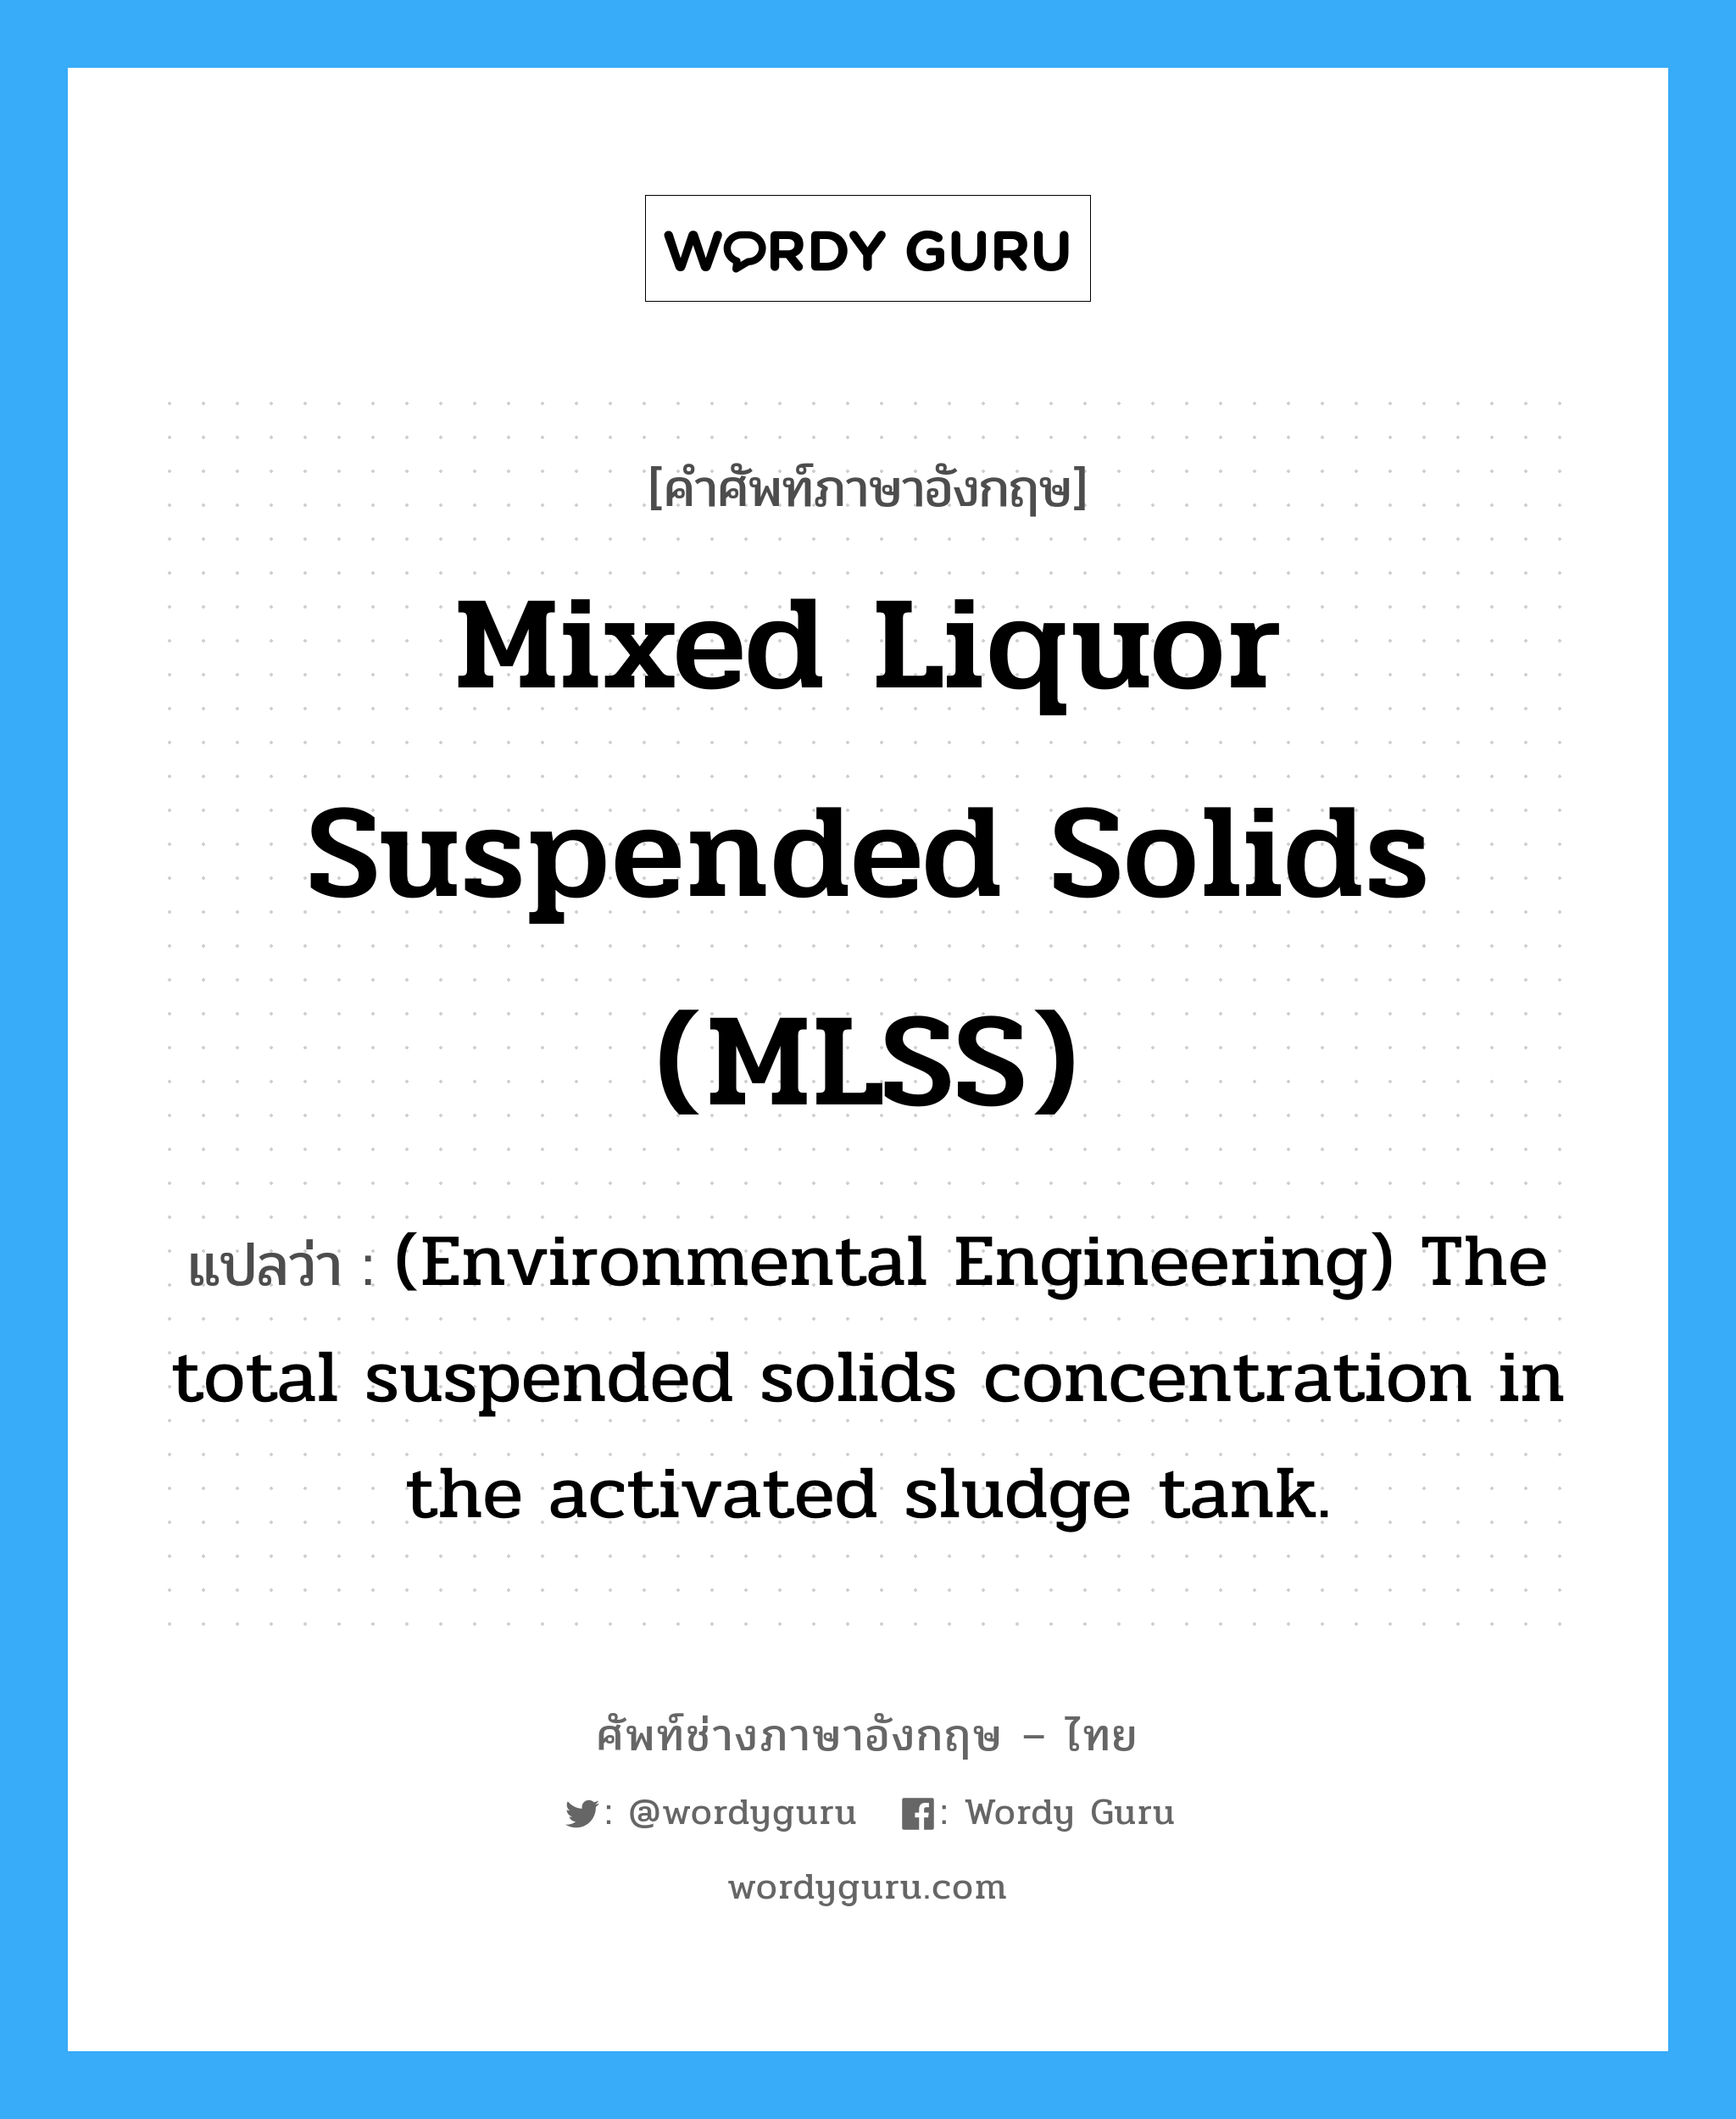 (Environmental Engineering) The total suspended solids concentration in the activated sludge tank. ภาษาอังกฤษ?, คำศัพท์ช่างภาษาอังกฤษ - ไทย (Environmental Engineering) The total suspended solids concentration in the activated sludge tank. คำศัพท์ภาษาอังกฤษ (Environmental Engineering) The total suspended solids concentration in the activated sludge tank. แปลว่า Mixed liquor suspended solids (MLSS)